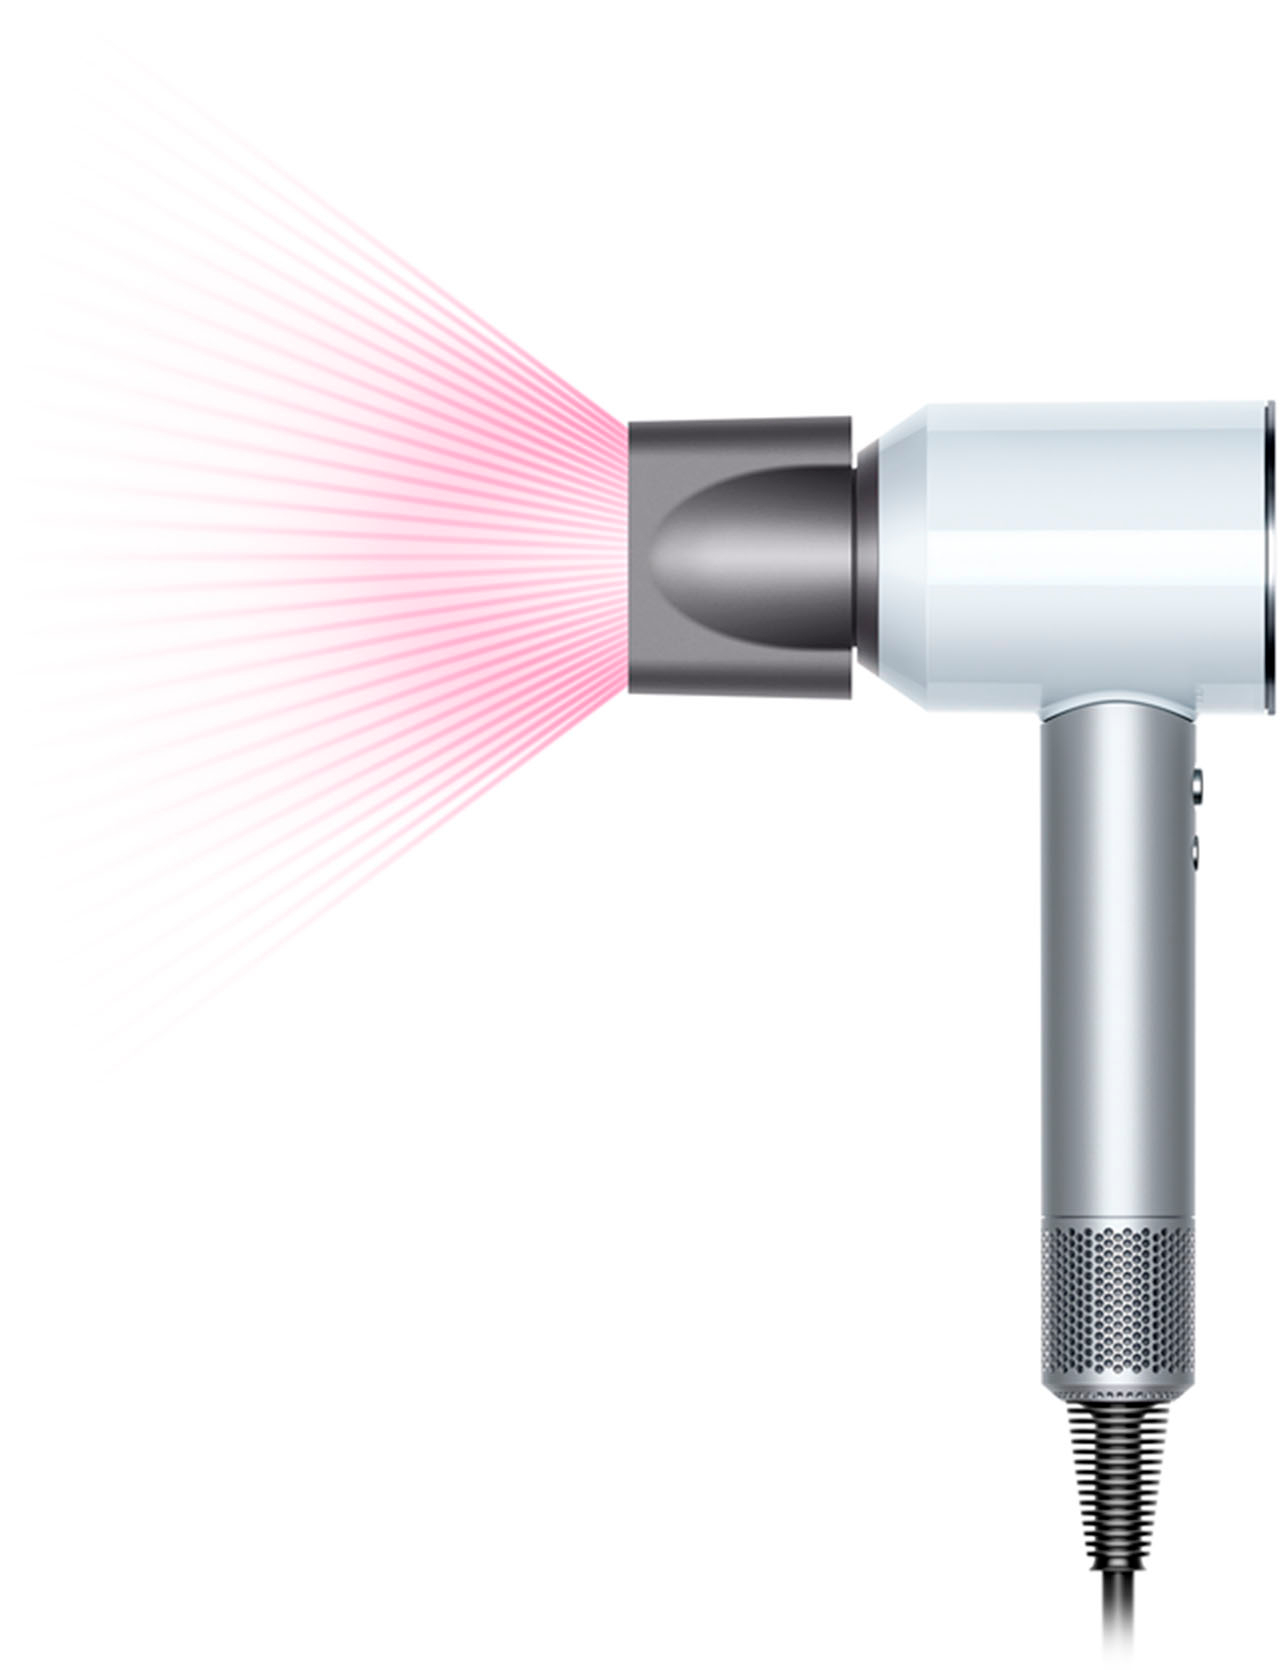 Dyson - Supersonic Hair Dryer - White/Silver